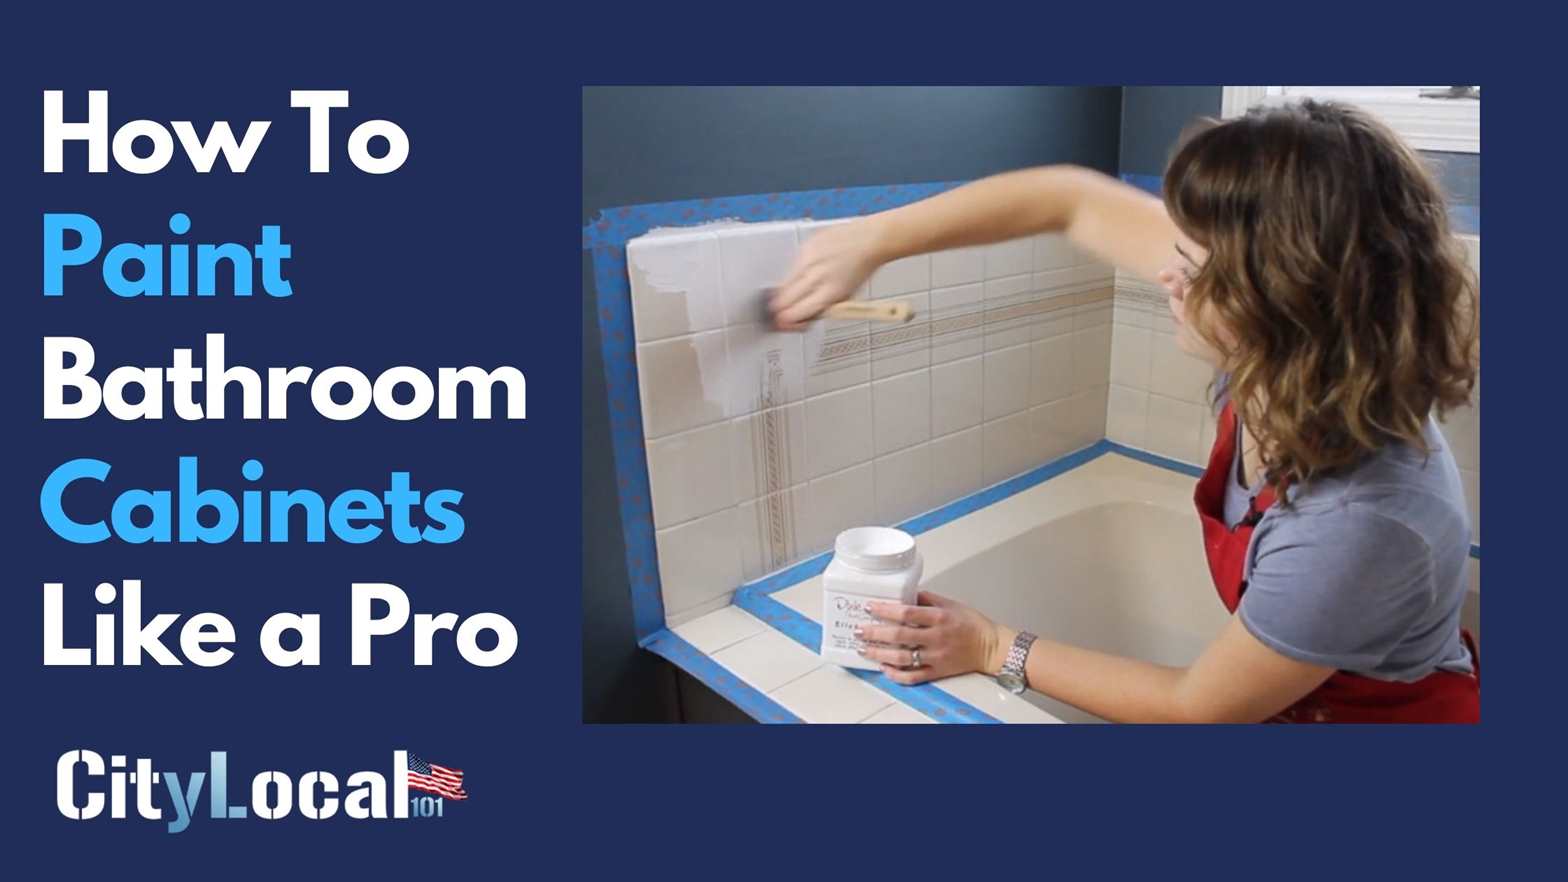 How To Paint Bathroom Cabinets Like a Pro